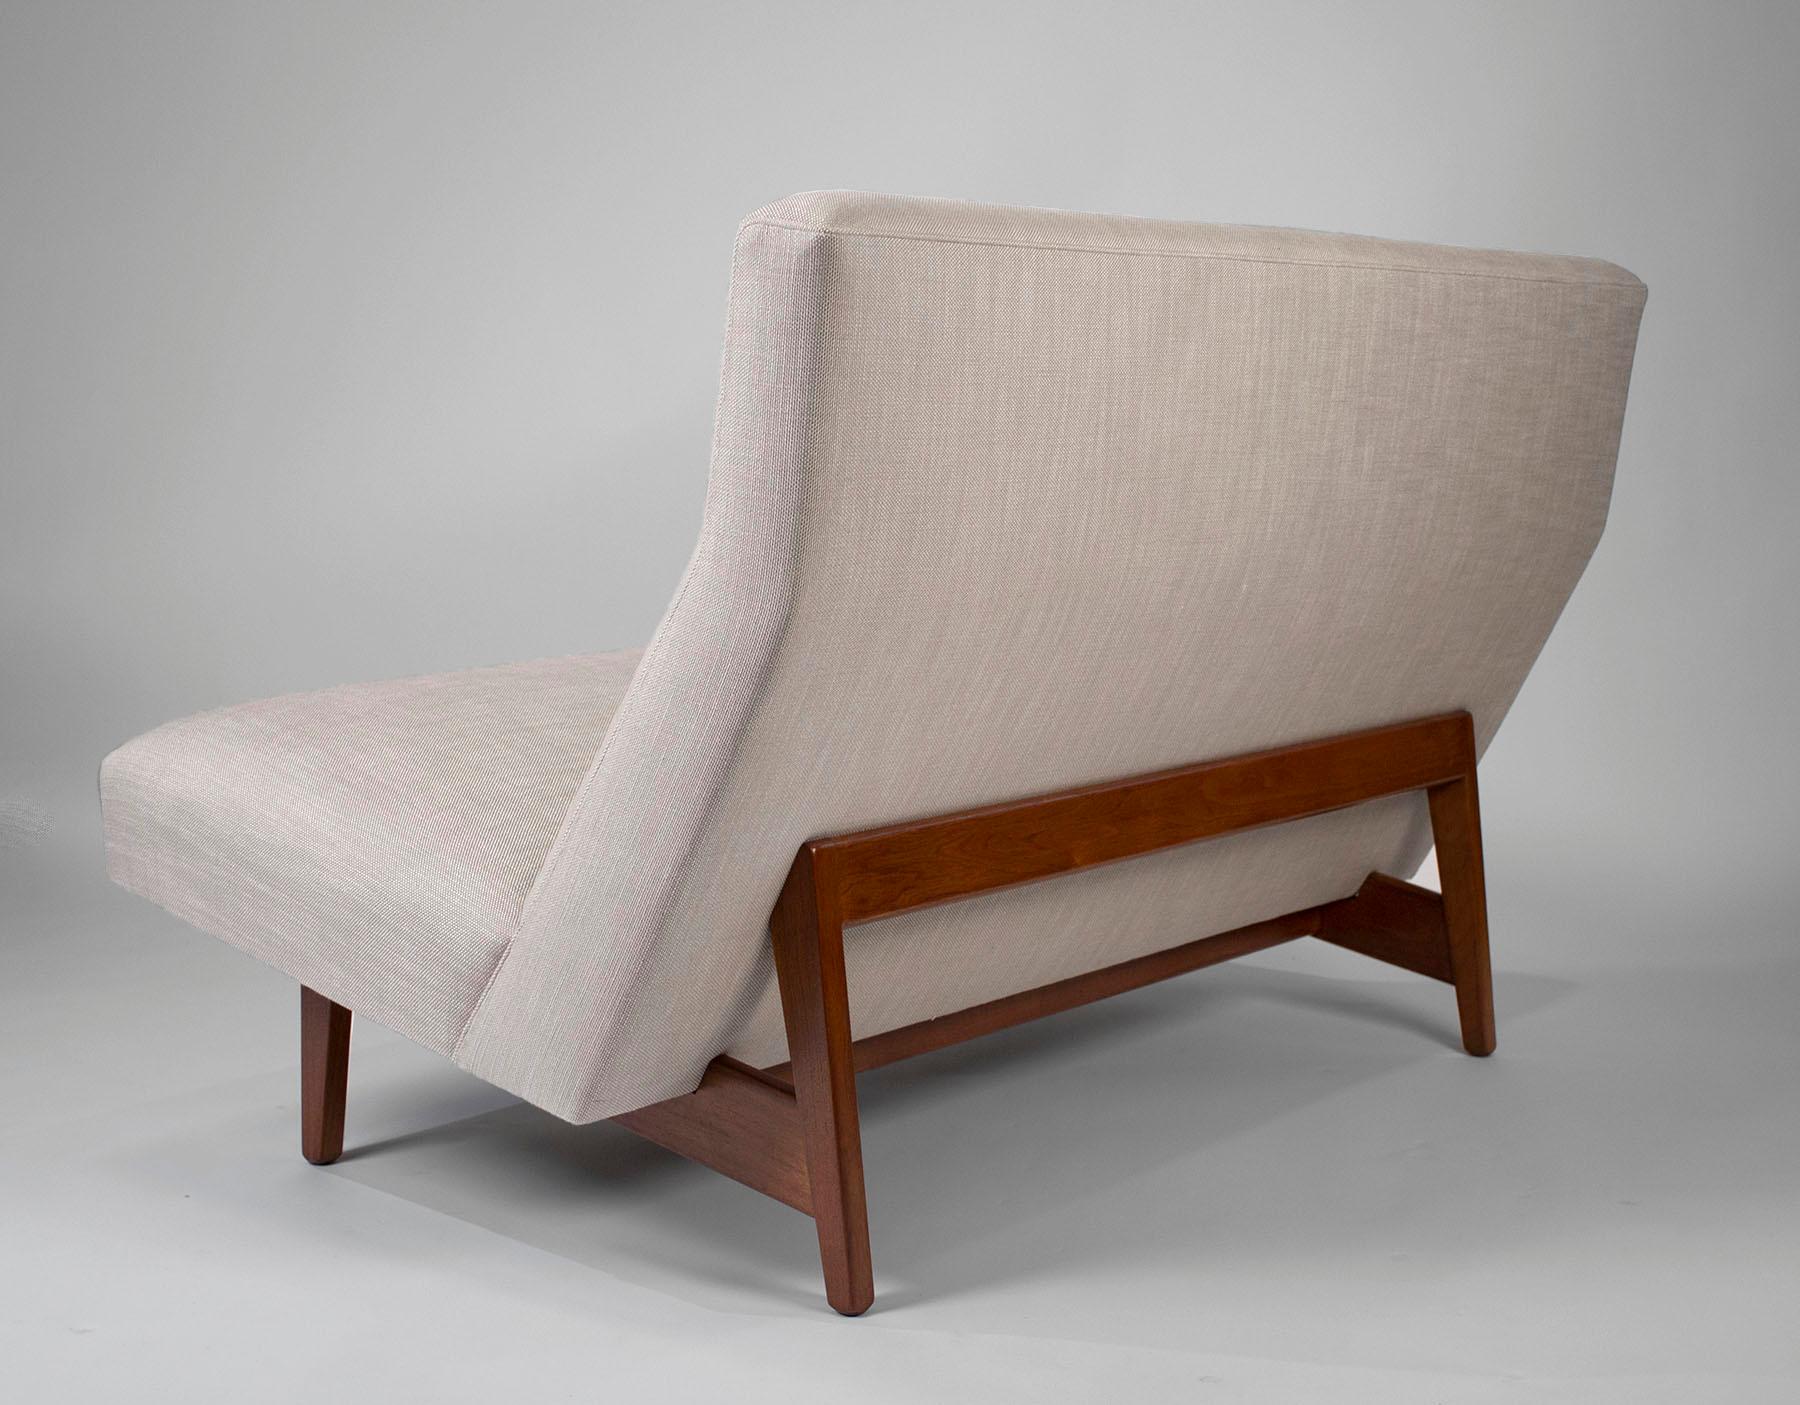 20th Century Jens Risom Armless Settee in Walnut Cradle Frames with Linen Upholstery